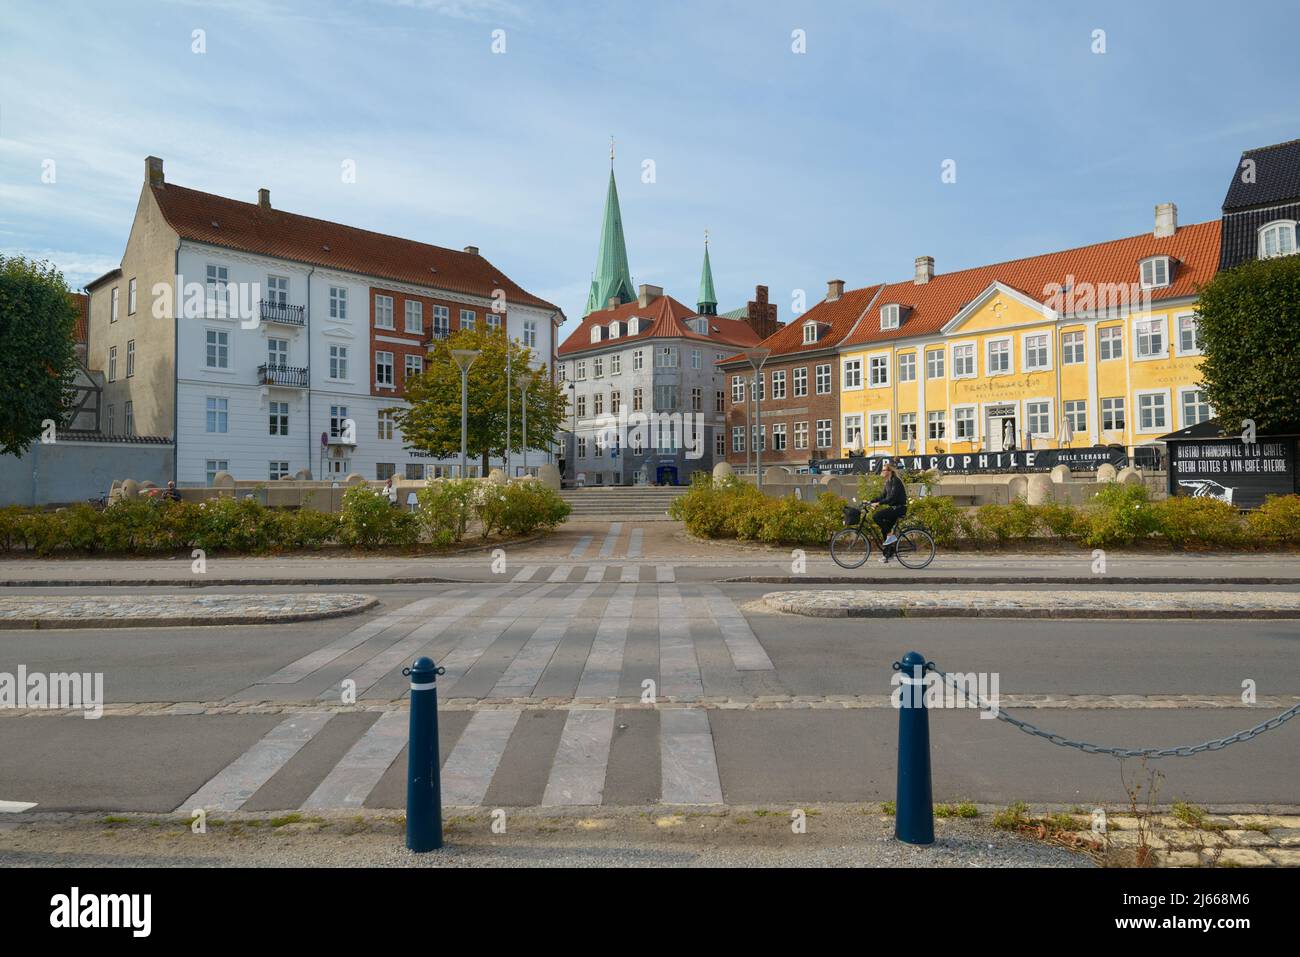 Helsingør, Denmark / 09.22.2016: View of a coastal street in Helsingør, a girl riding a bike, resting people in a small park area, old buildings and a Stock Photo